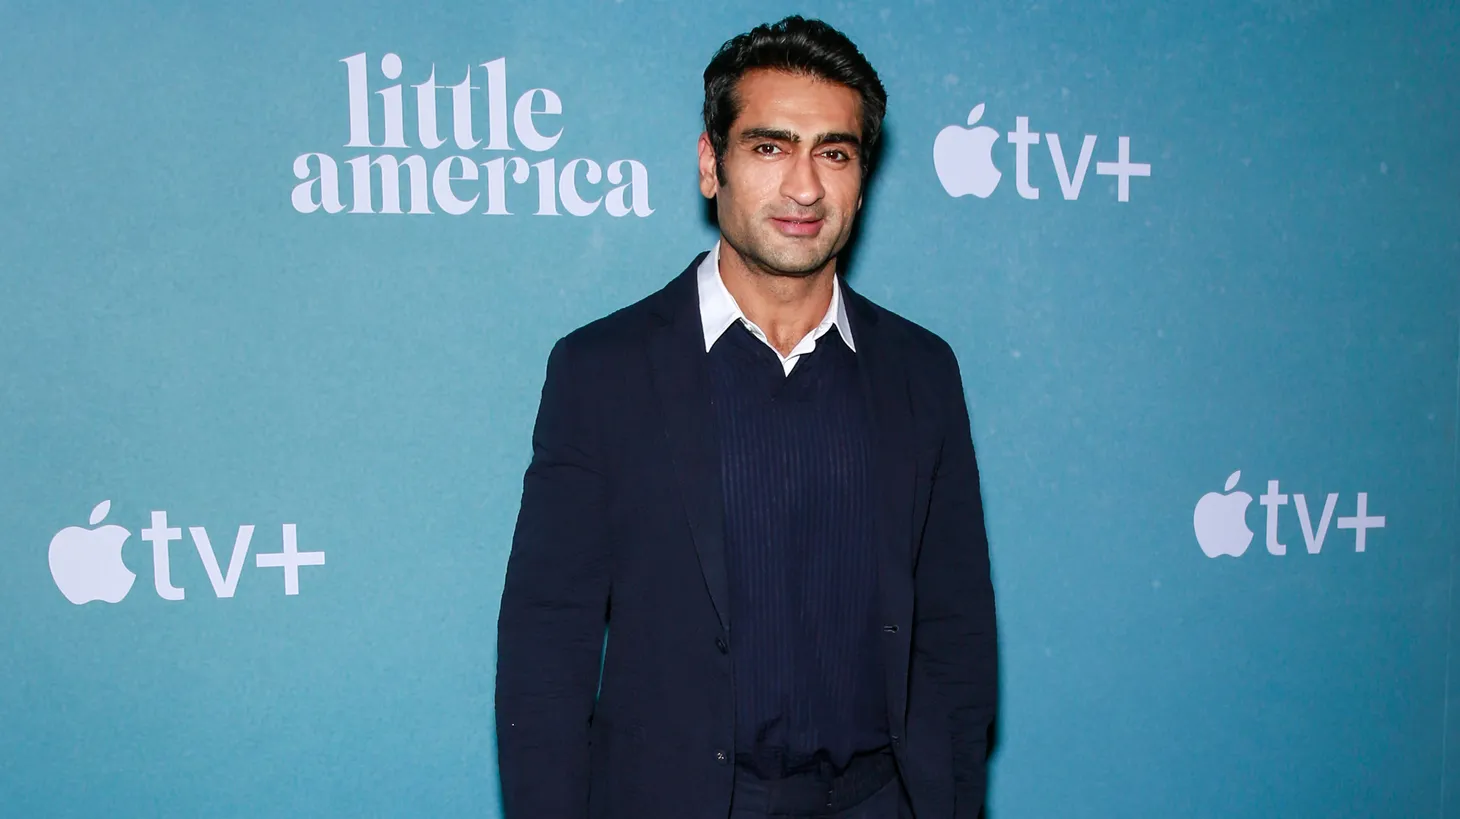 Kumail Nanjiani attends the premiere of Apple TV+'s "Little America" at the Pacific Design Center, on January 23, 2022.